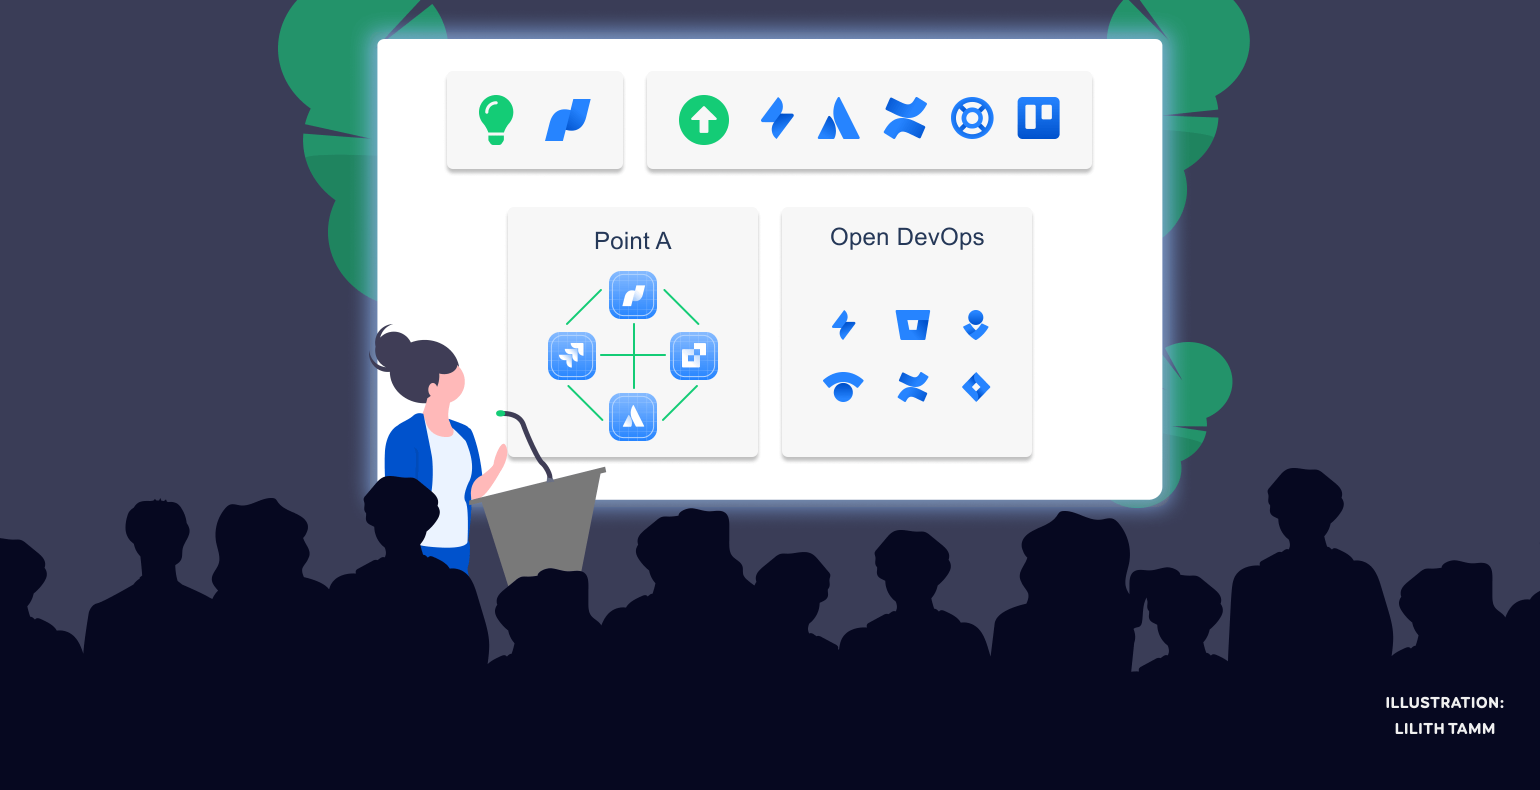 Illustration of a woman introducing to the audience Atlassian's Point A program and Open DevOps experience